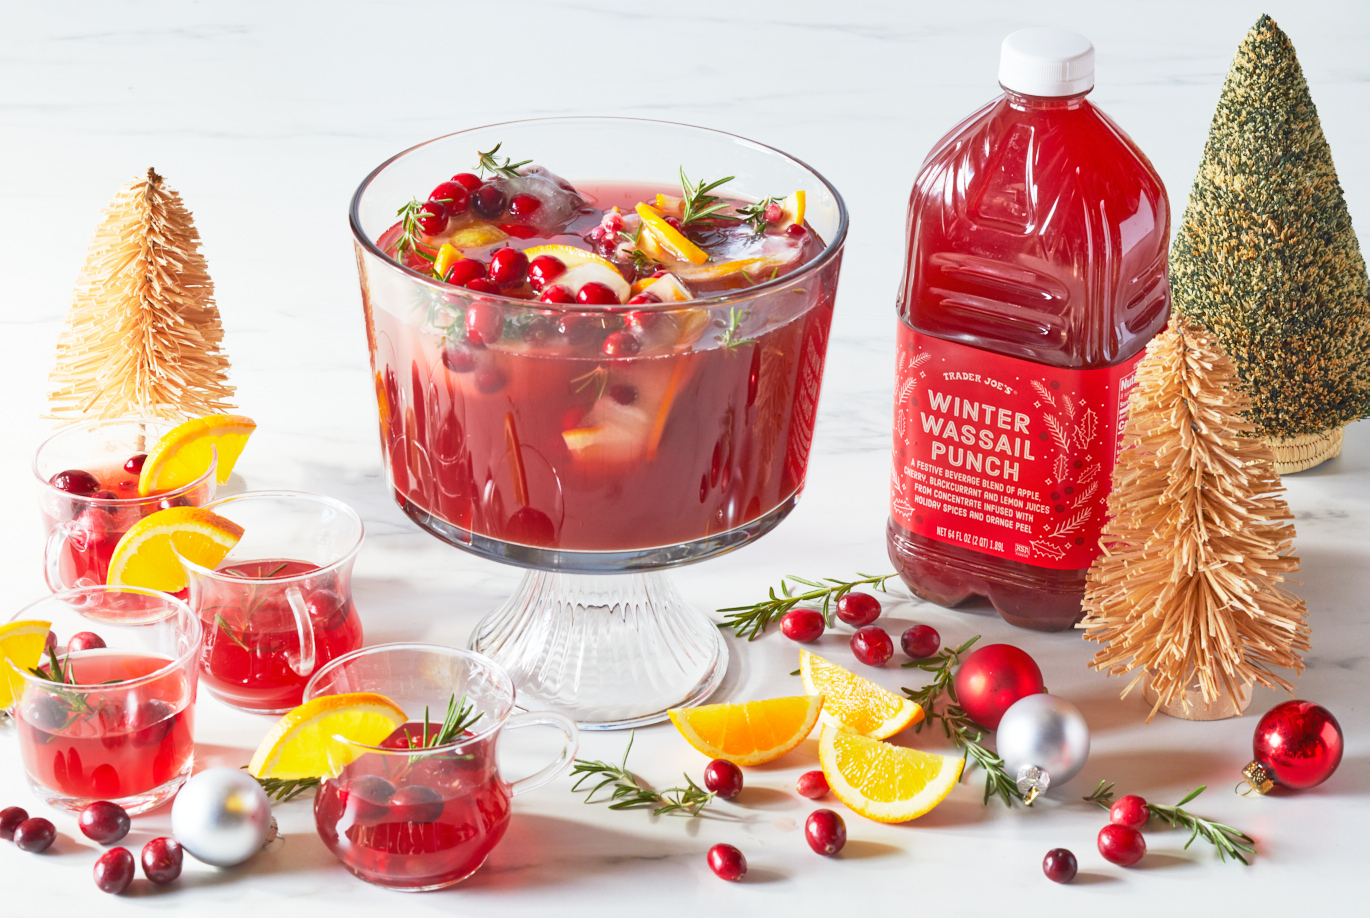 Trader Joe's Winter Wassail Punch; in a punch bowl, surrounded by festive glasses filled with punch, cranberries and rosemary garnishes